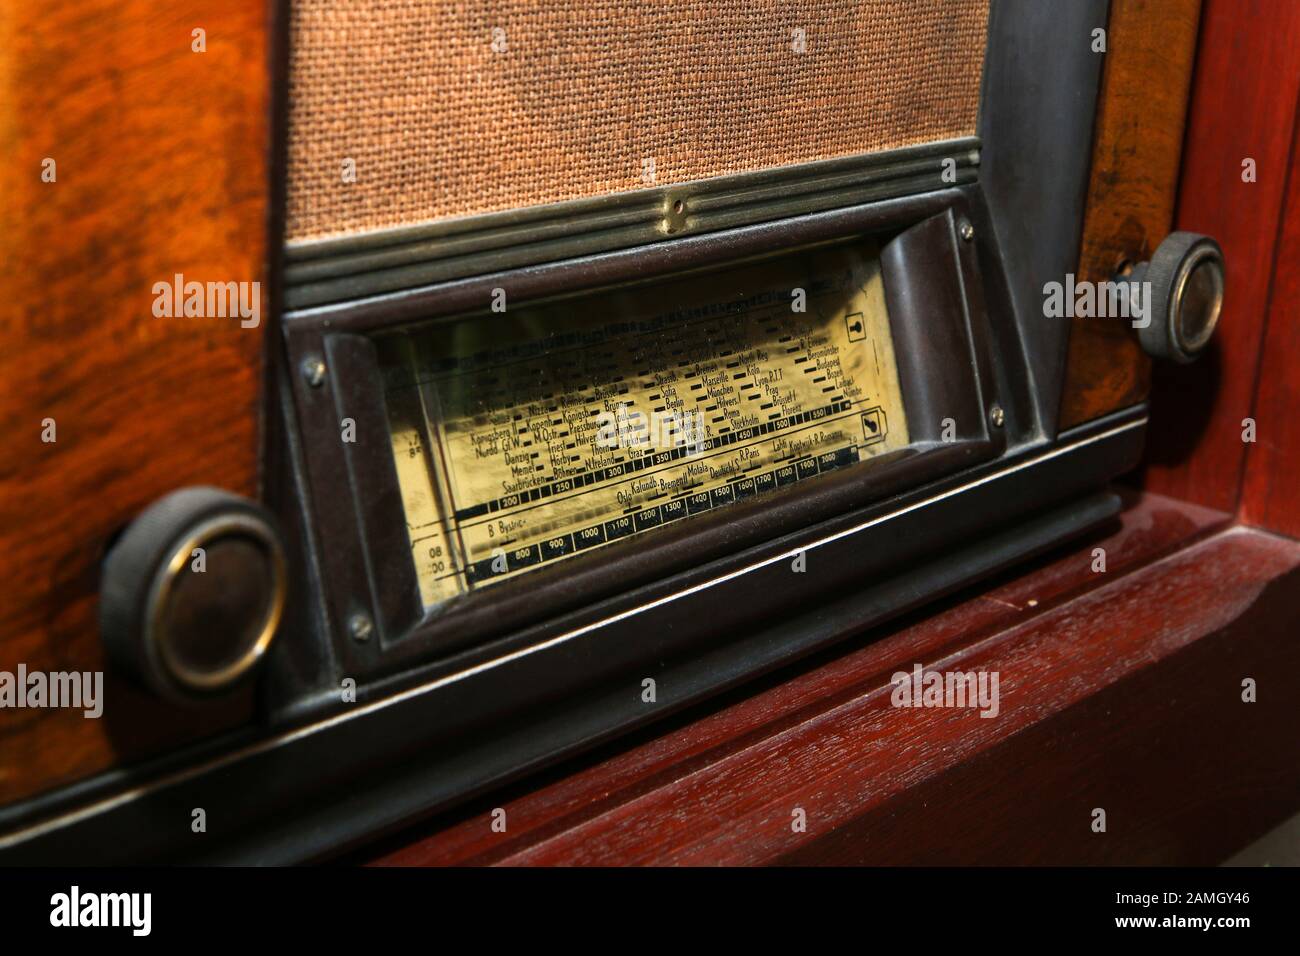 The old retro wooden radio receiver in great condition. The antique design artifact. Stock Photo